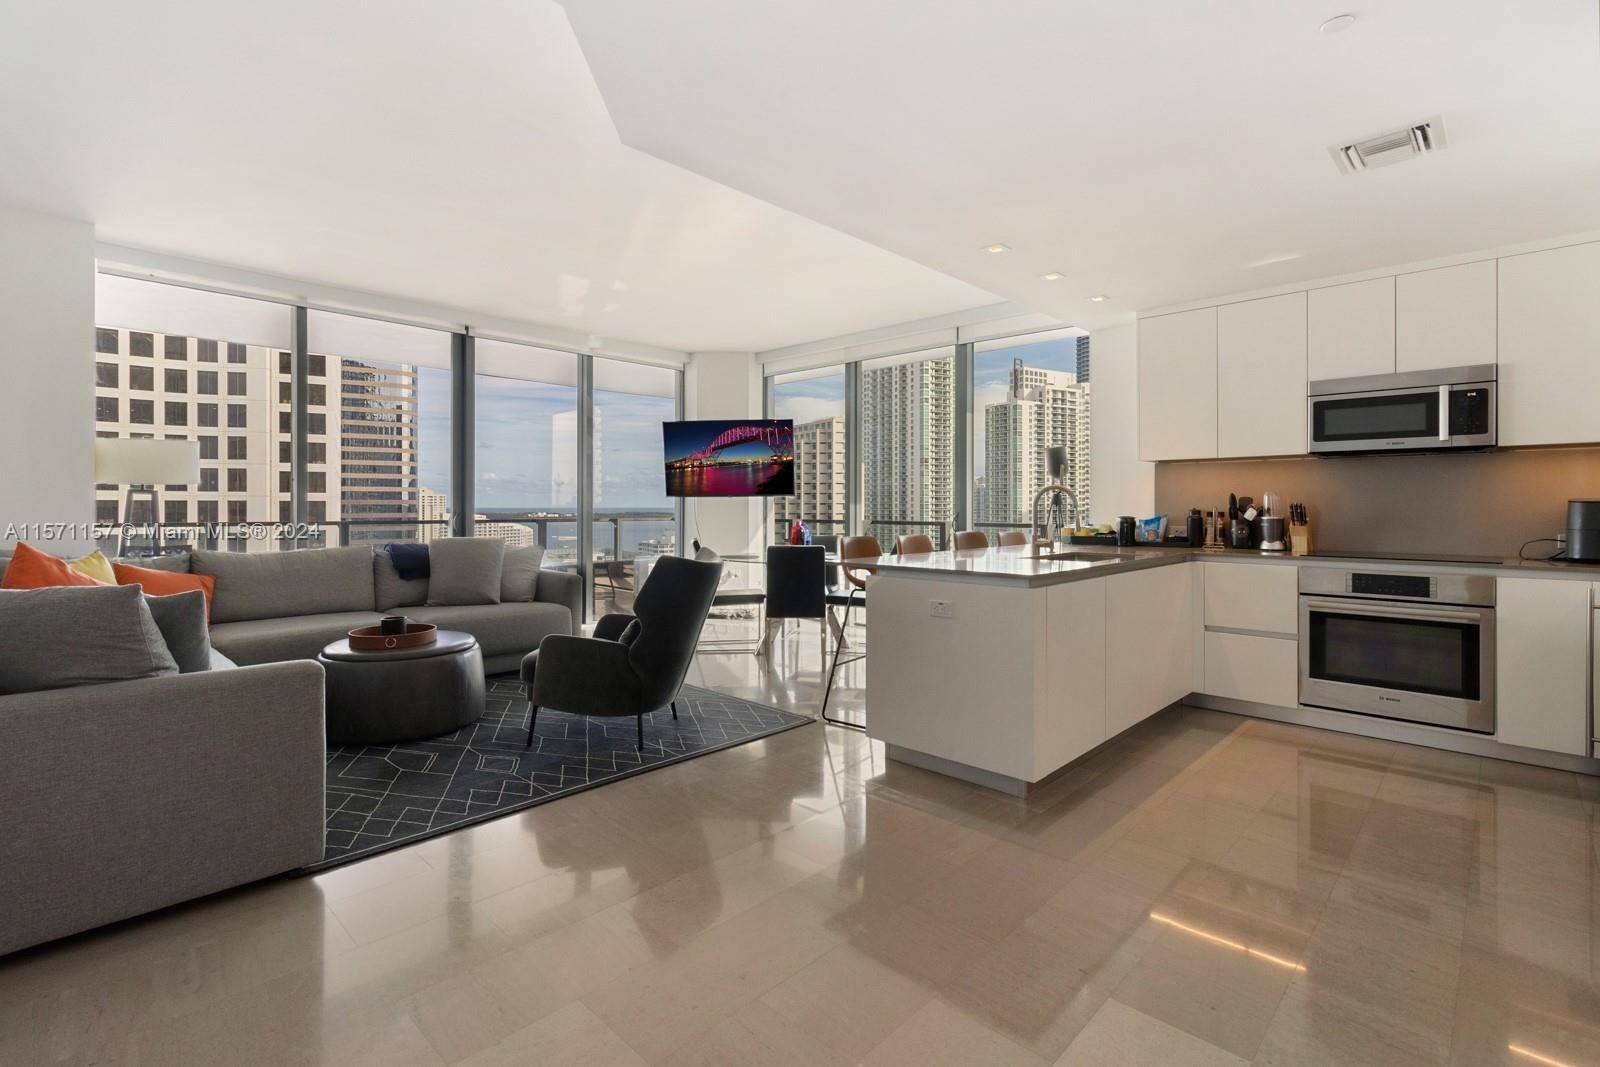 Most desirable 2 bed 2. 5 bath South East corner unit at Reach in Brickell City Centre.